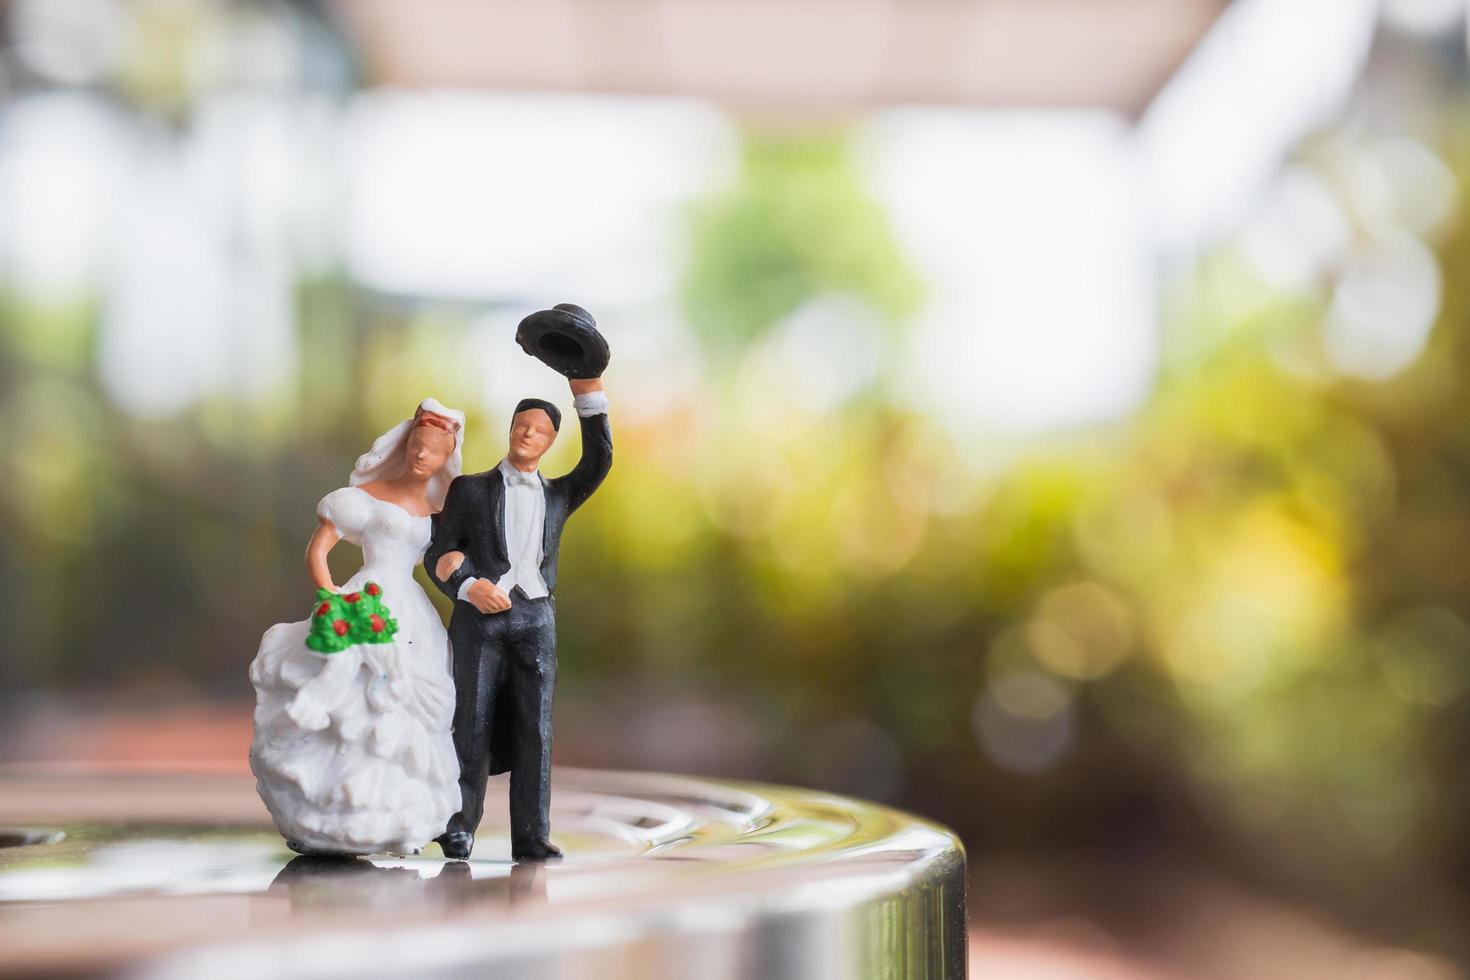 Miniature bride and groom couple standing on a stage, wedding concept photo